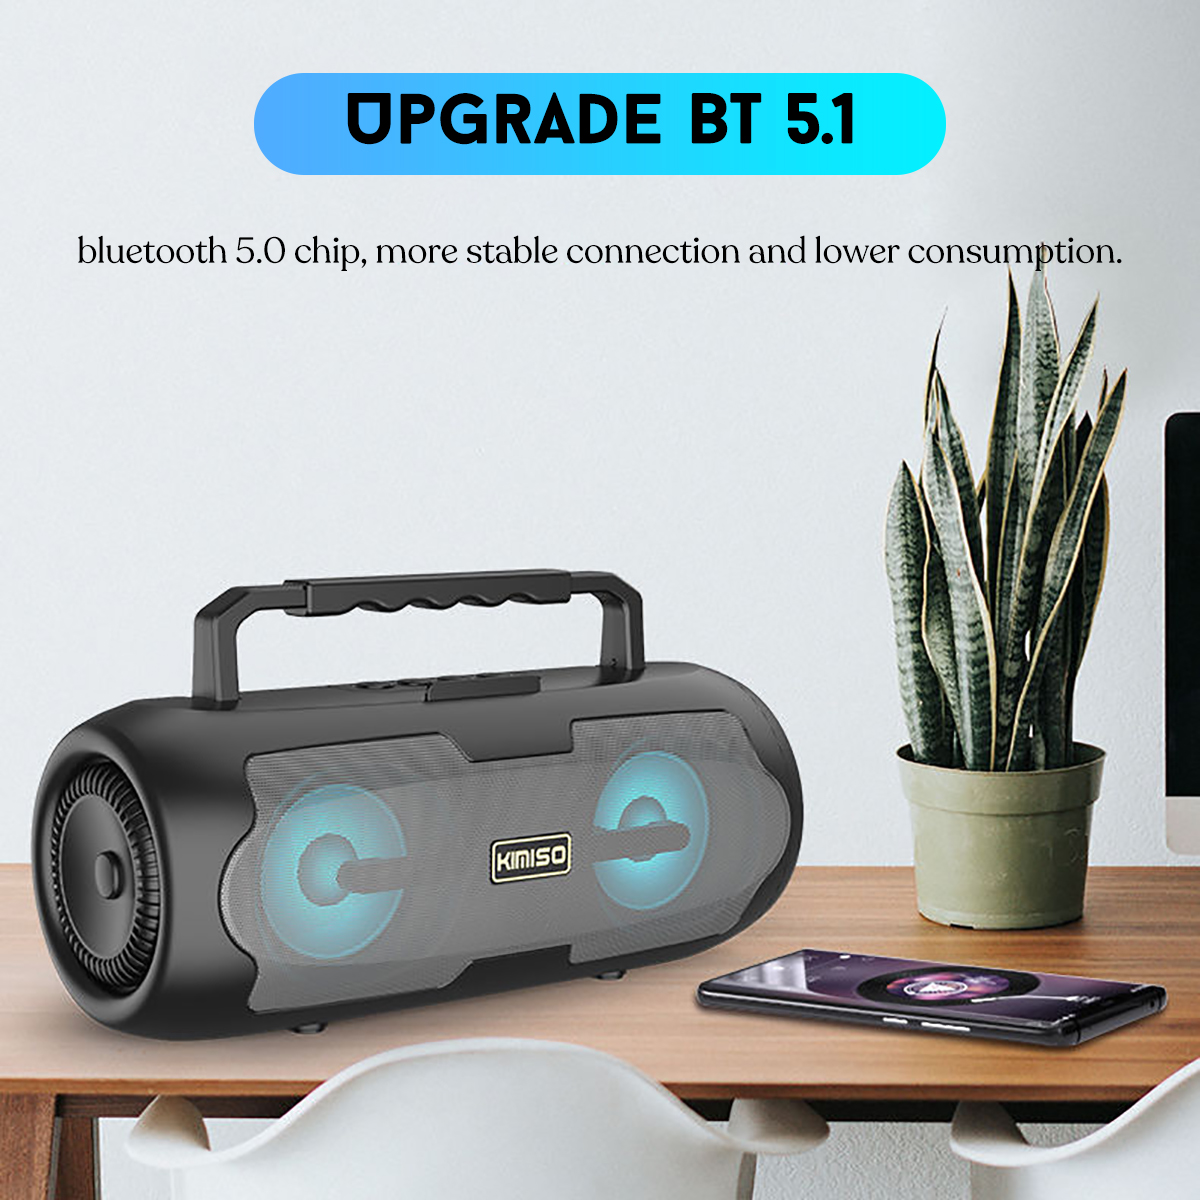 10W-Wireless-bluetooth-Speaker-LED-Portable-Amplifier-Subwoofer-Boombox-FM-Radio-TF-Card-USB-Outdoor-1931993-3